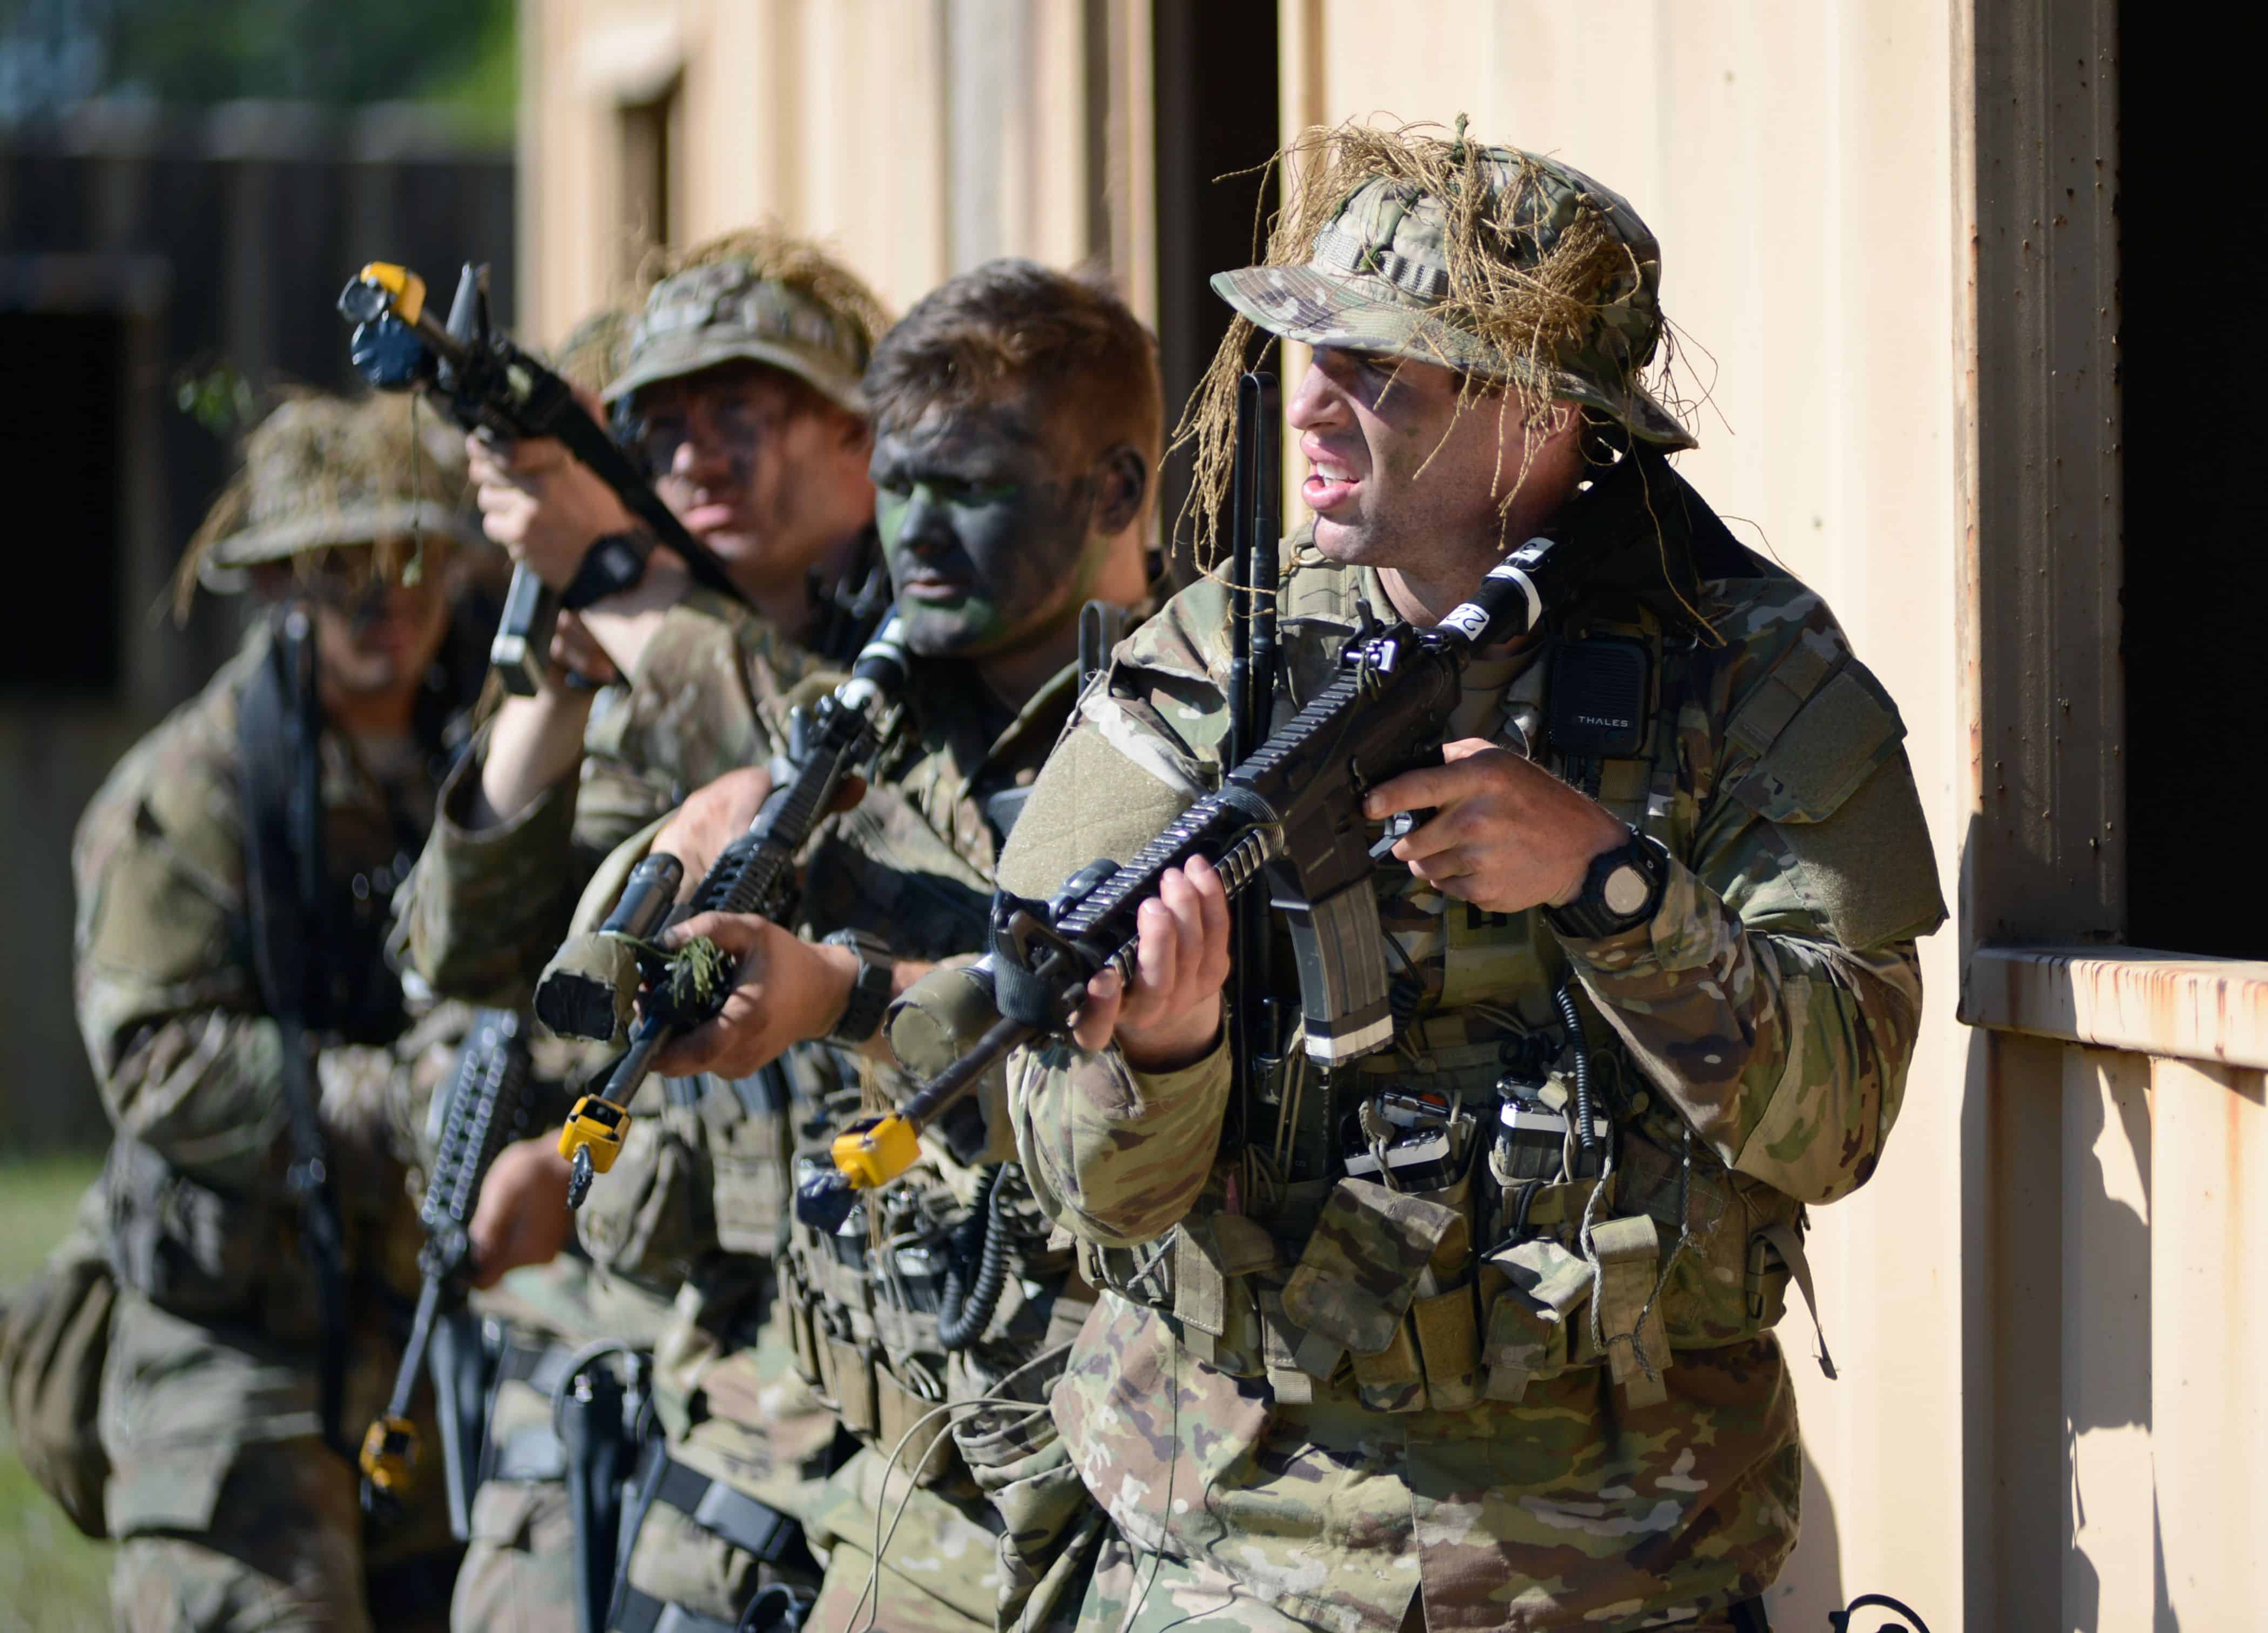 Soldiers assigned to the U.S. Army John F. Kennedy Special Warfare Center and School participate in Basic Urban Combat training during the Tactical Skills portion of the Special Forces Qualification Course (SFQC) at Camp Mackall, North Carolina April 28, 2020. Soldiers participated in SFQC training that tested their knowledge of small-unit tactics and basic urban operations to ensure they possess the combat skills required to not only successfully operate on a Special Forces Operational Detatchment Alpha, but on the battlefields of today and tomorrow. (U.S. Army photo by K. Kassens)